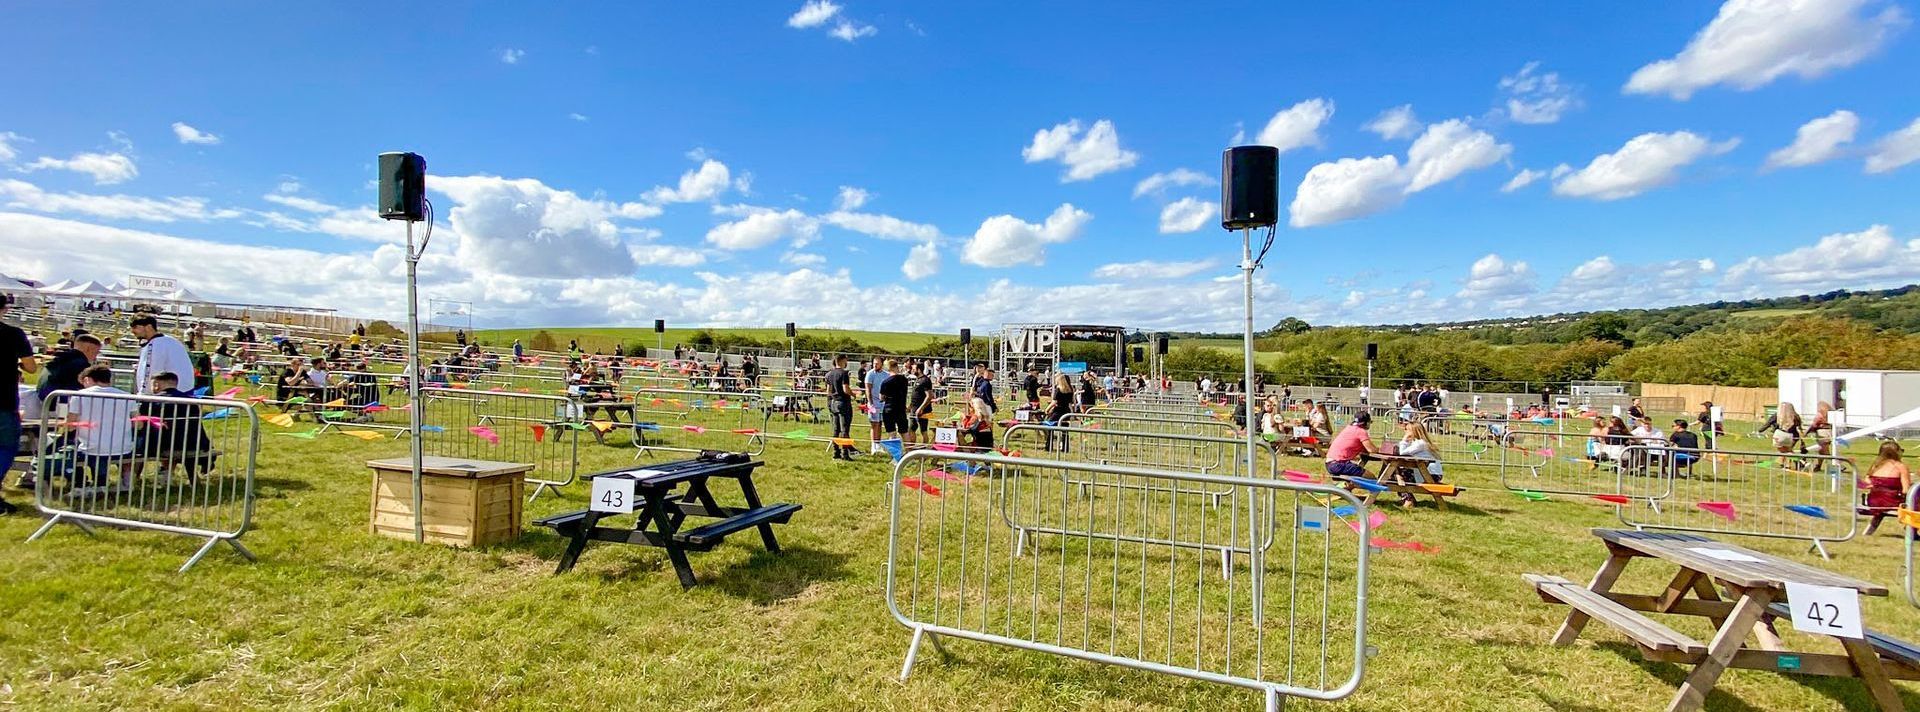 A wide angle of an event site, set up with picnic tables that are socially distances. The trailer stage can be seen in the distance and the sound system throughout the site set up on poles.